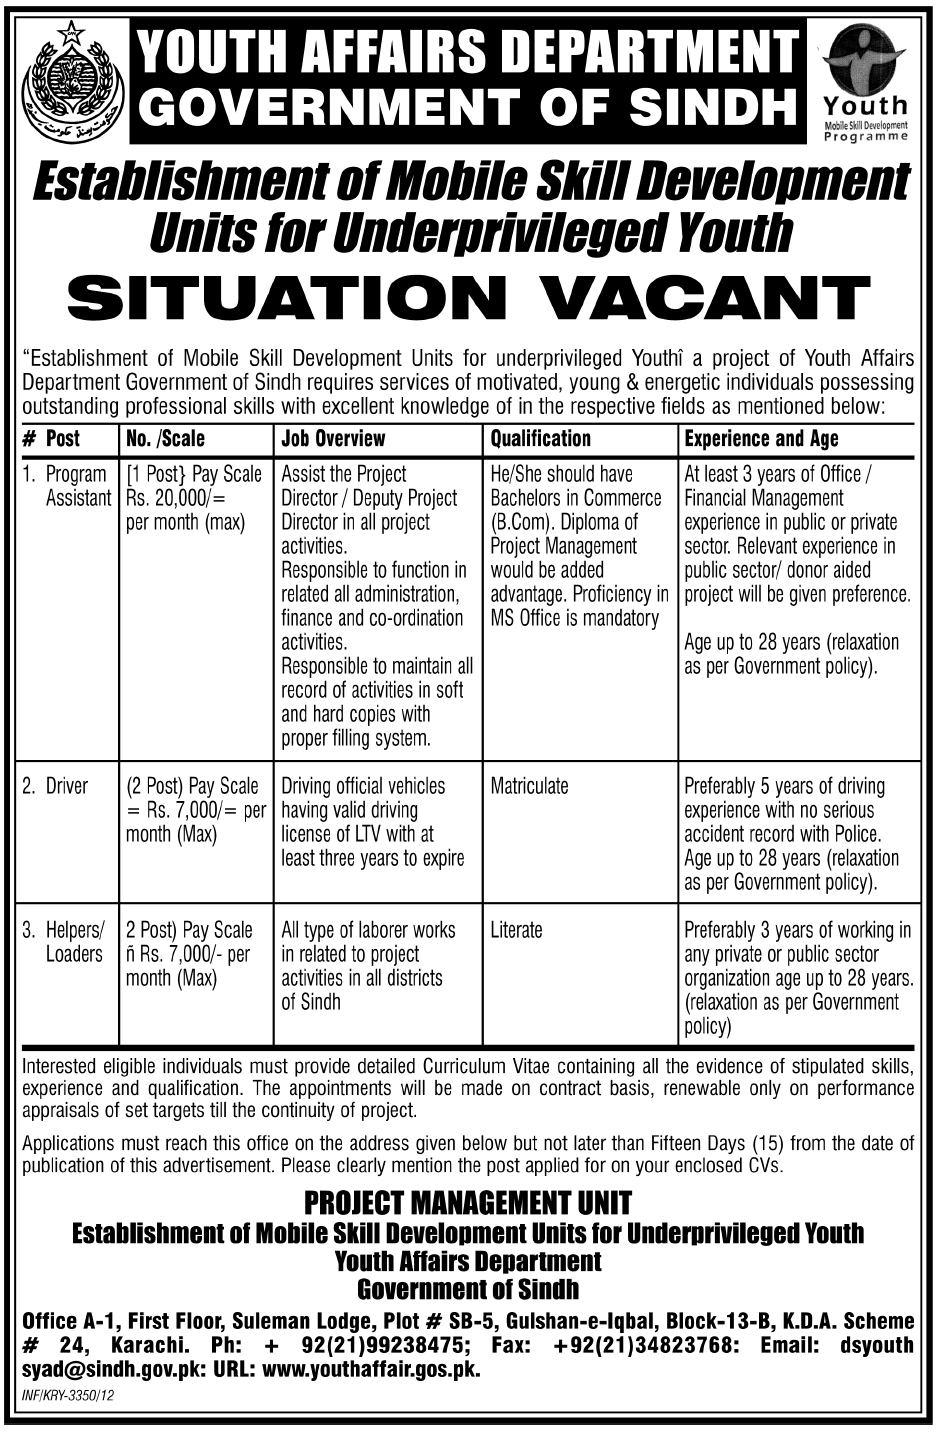 Youth Affairs Department Government of Sindh Jobs (Government Job)